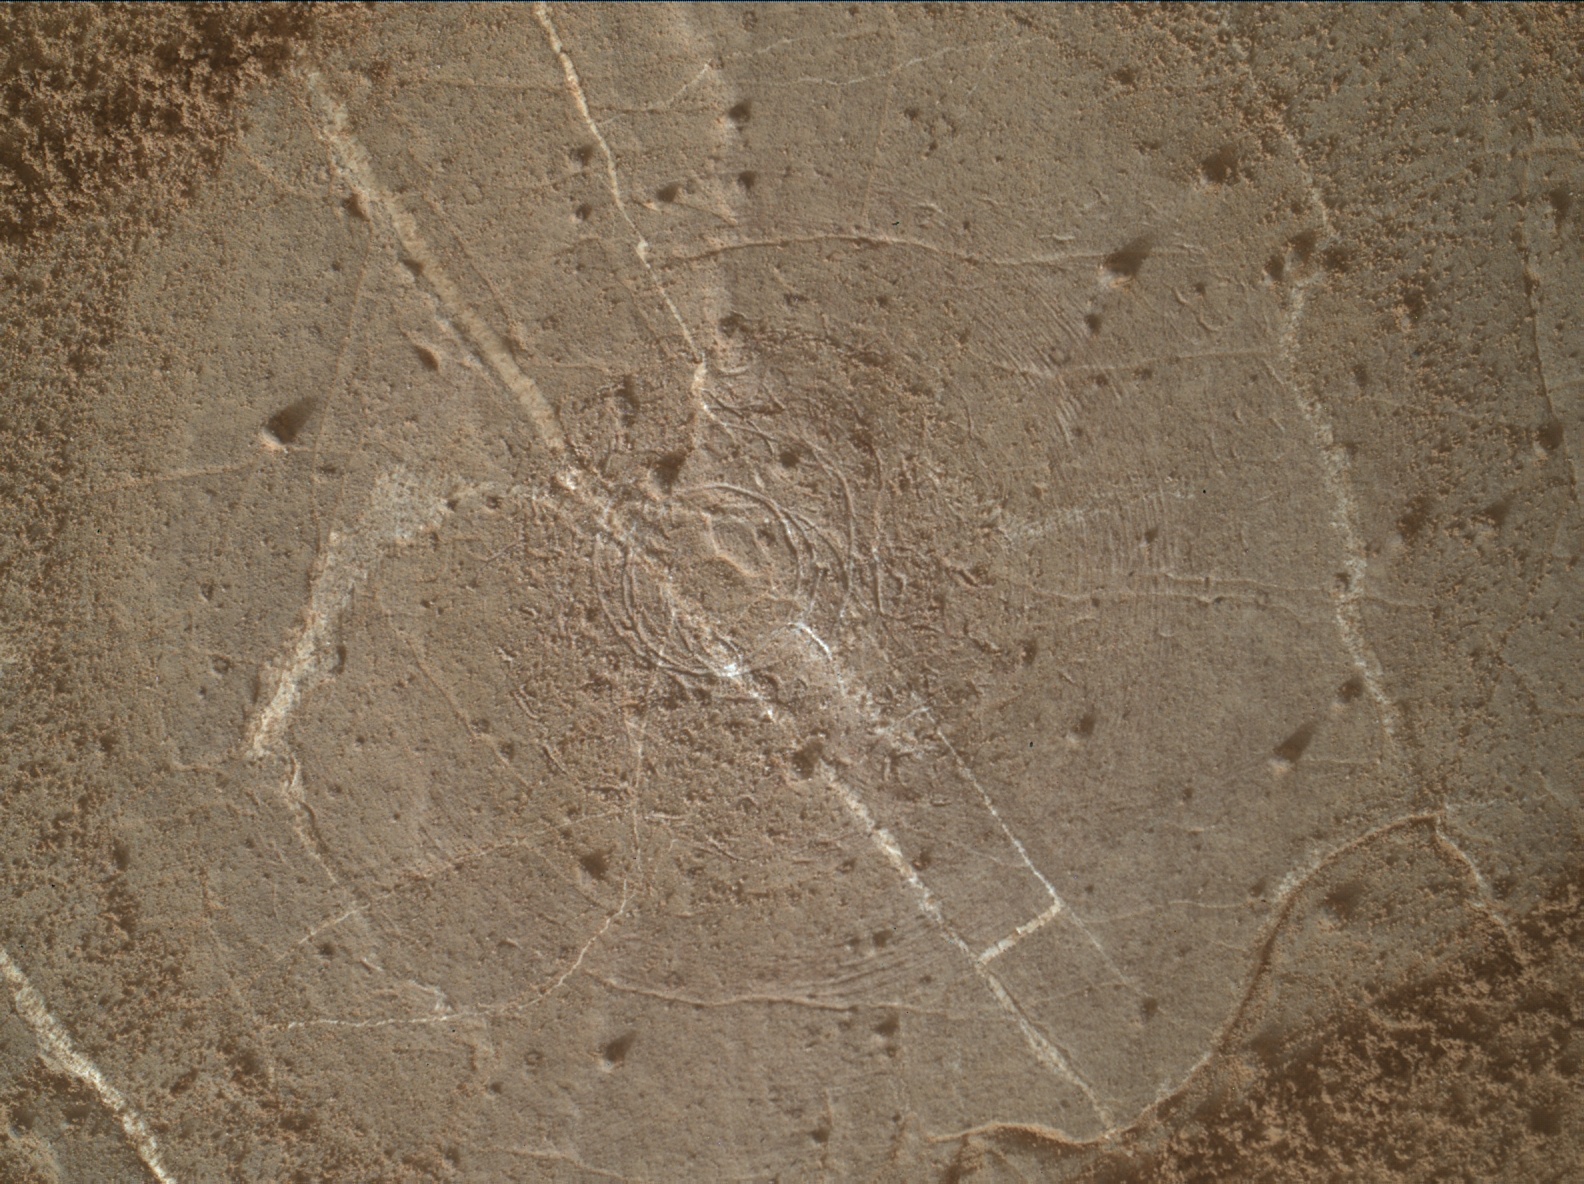 Nasa's Mars rover Curiosity acquired this image using its Mars Hand Lens Imager (MAHLI) on Sol 3051